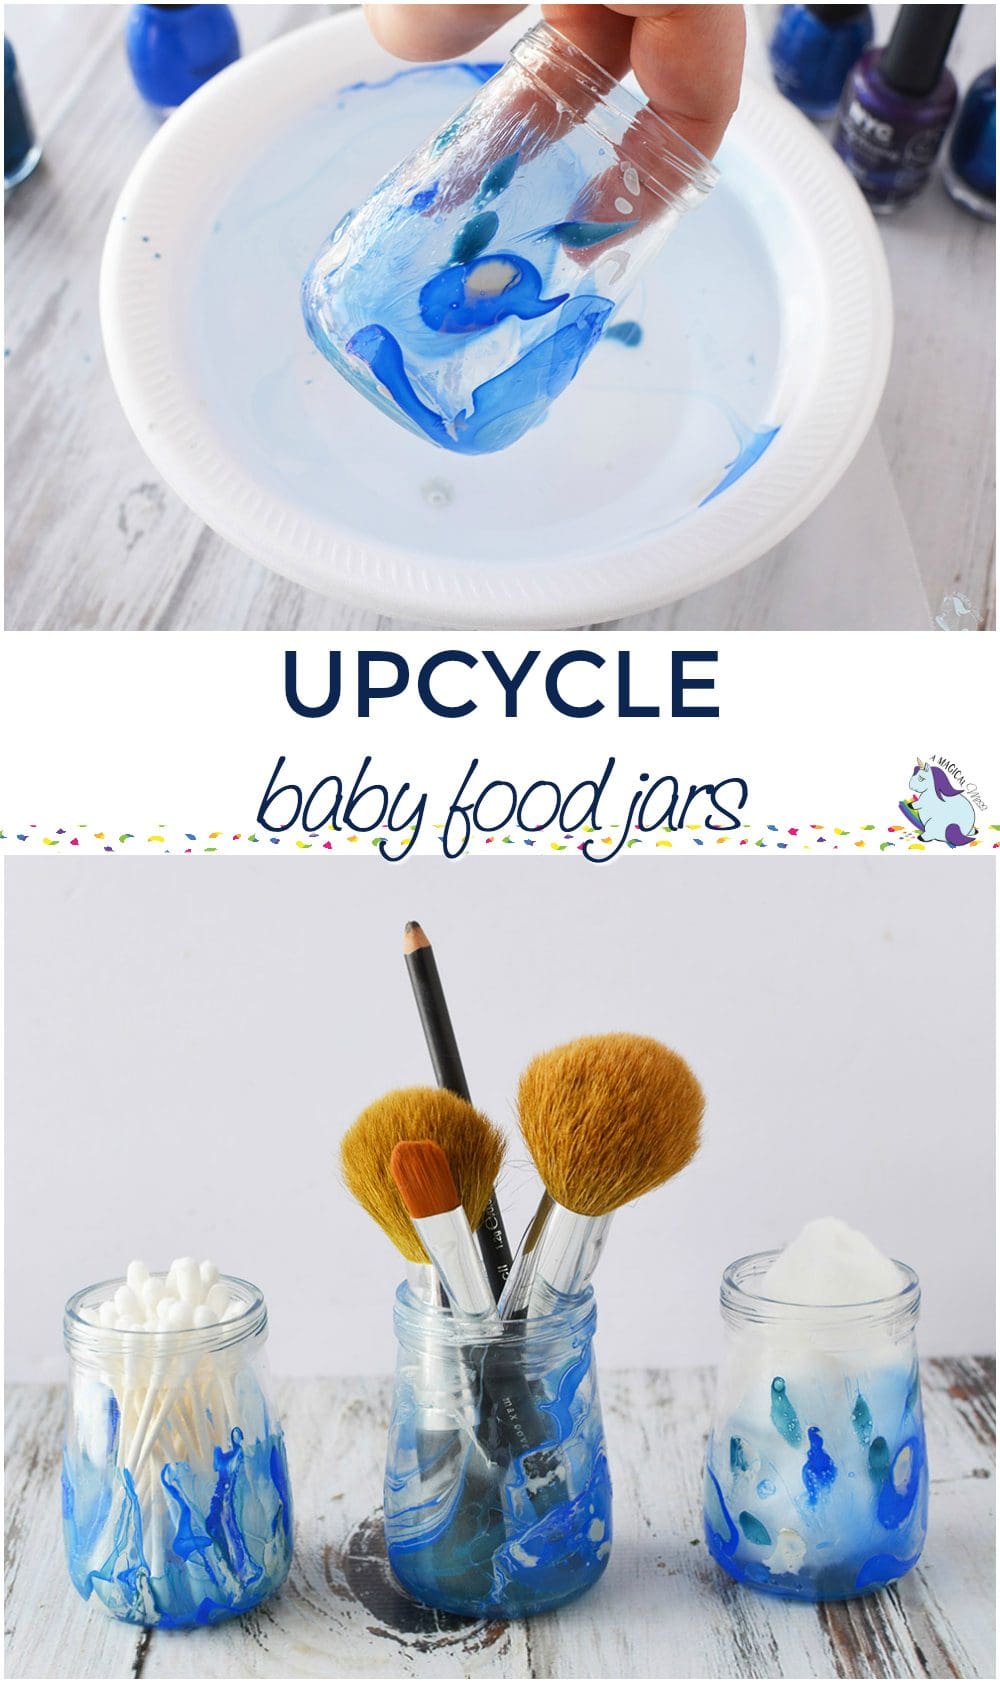 Upcycle Empty Baby Food Jars into Storage Containers